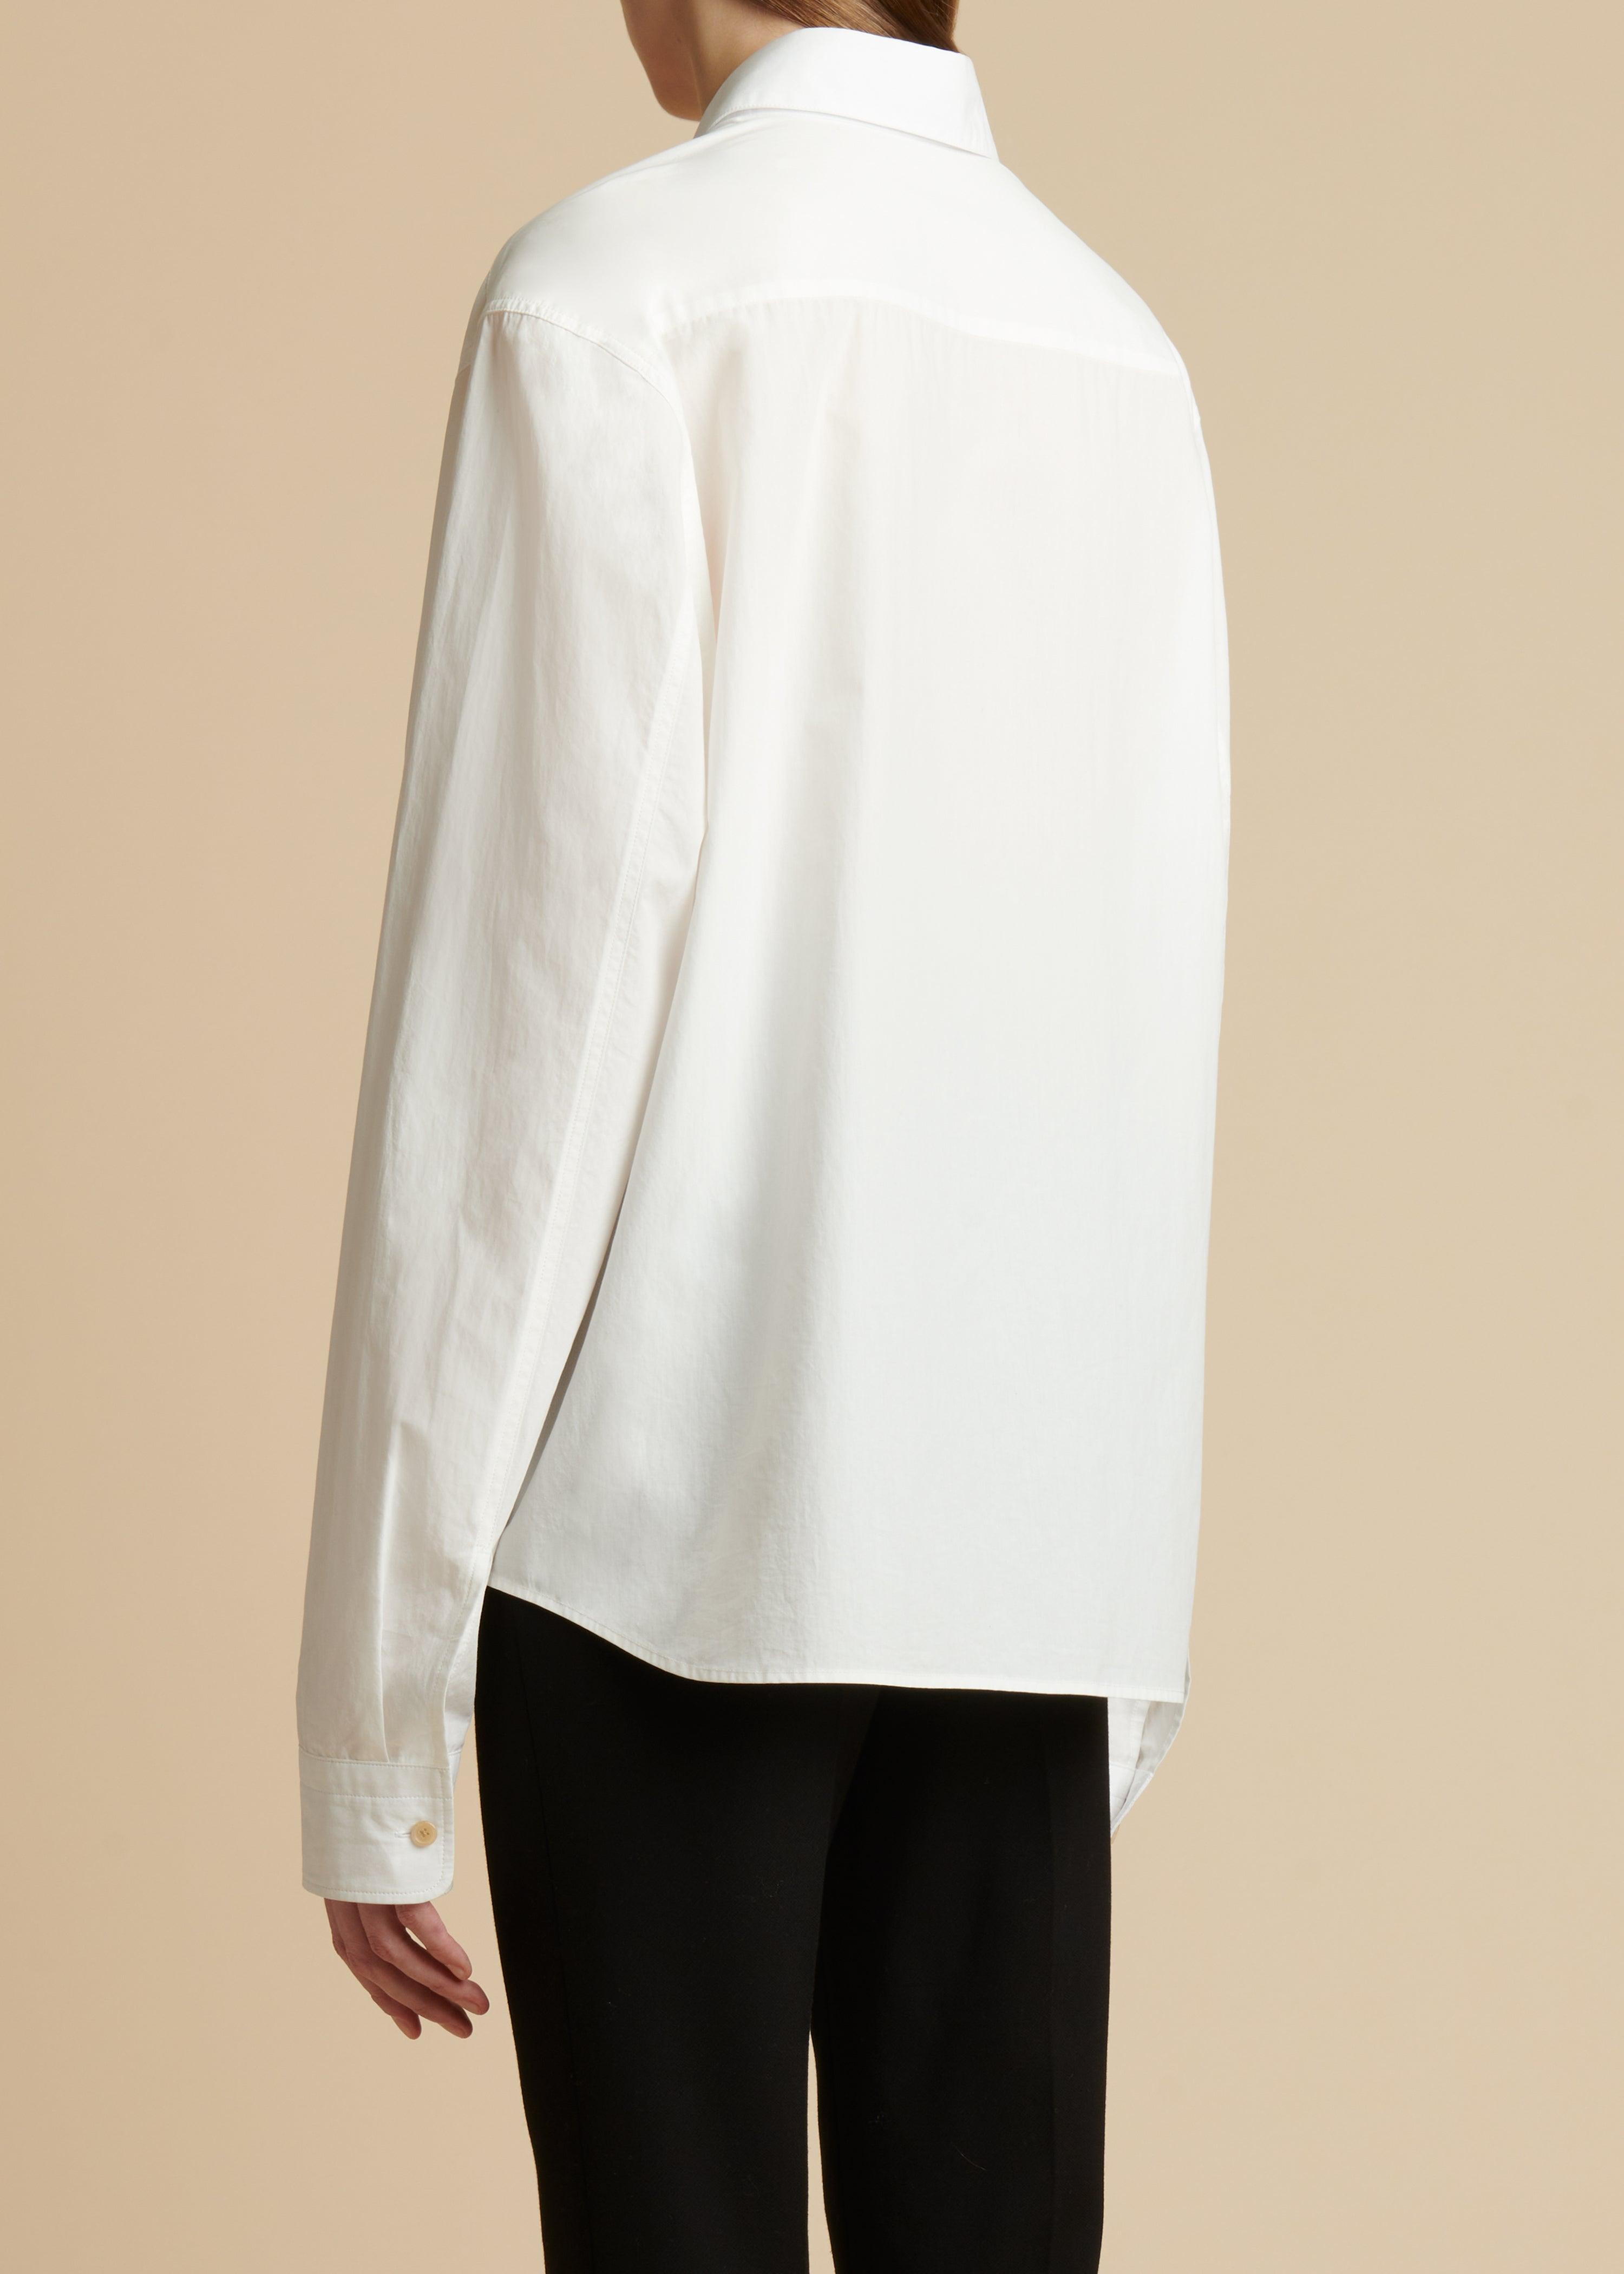 The Argo Top in White - The Iconic Issue